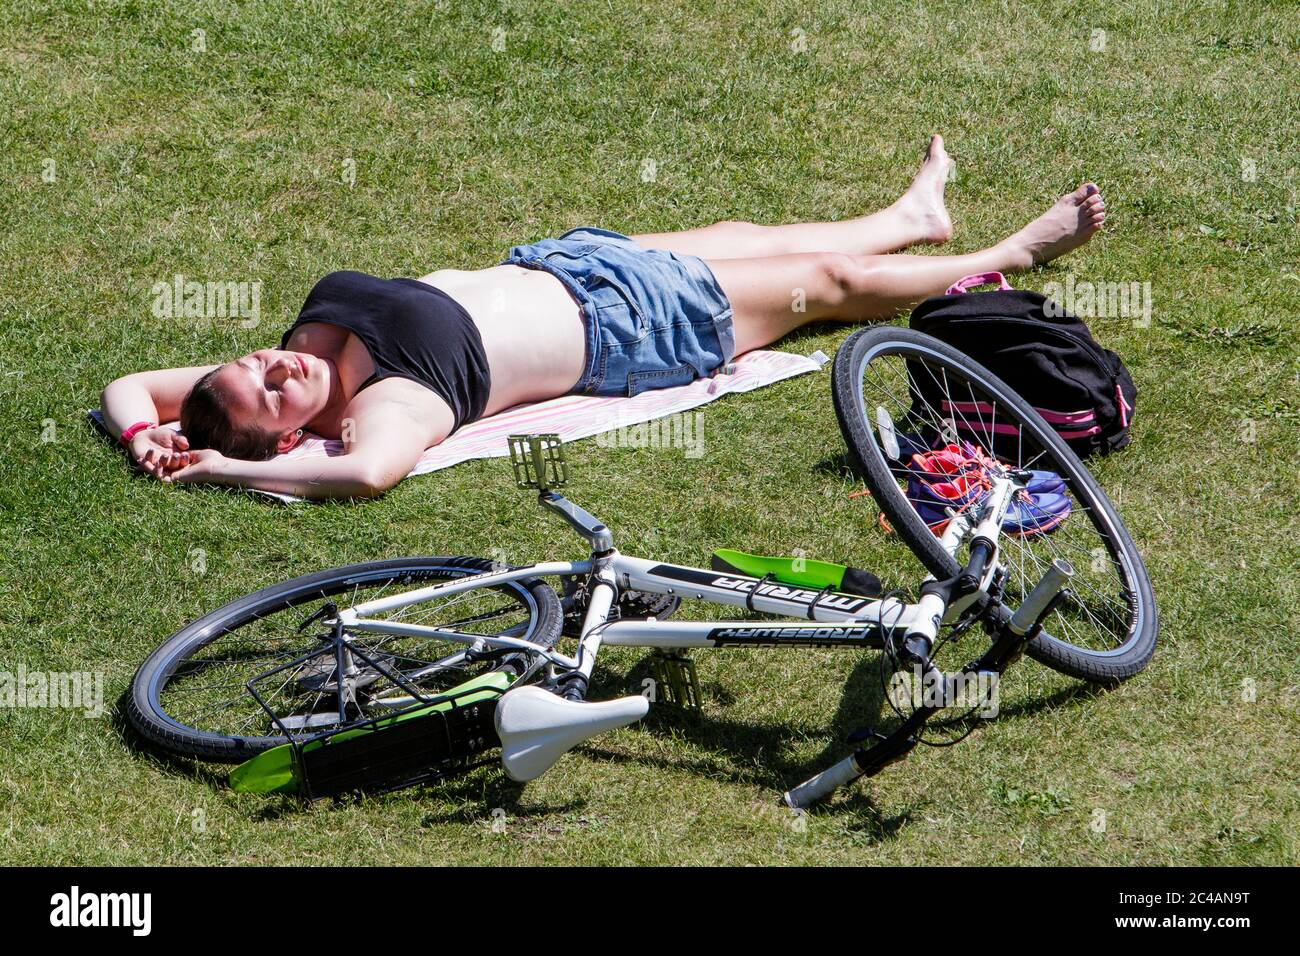 Bath, UK. 25th June, 2020. As Bath enjoys another hot and sunny day a woman is pictured sunbathing in Parade Gardens. Credit: Lynchpics/Alamy Live News Stock Photo